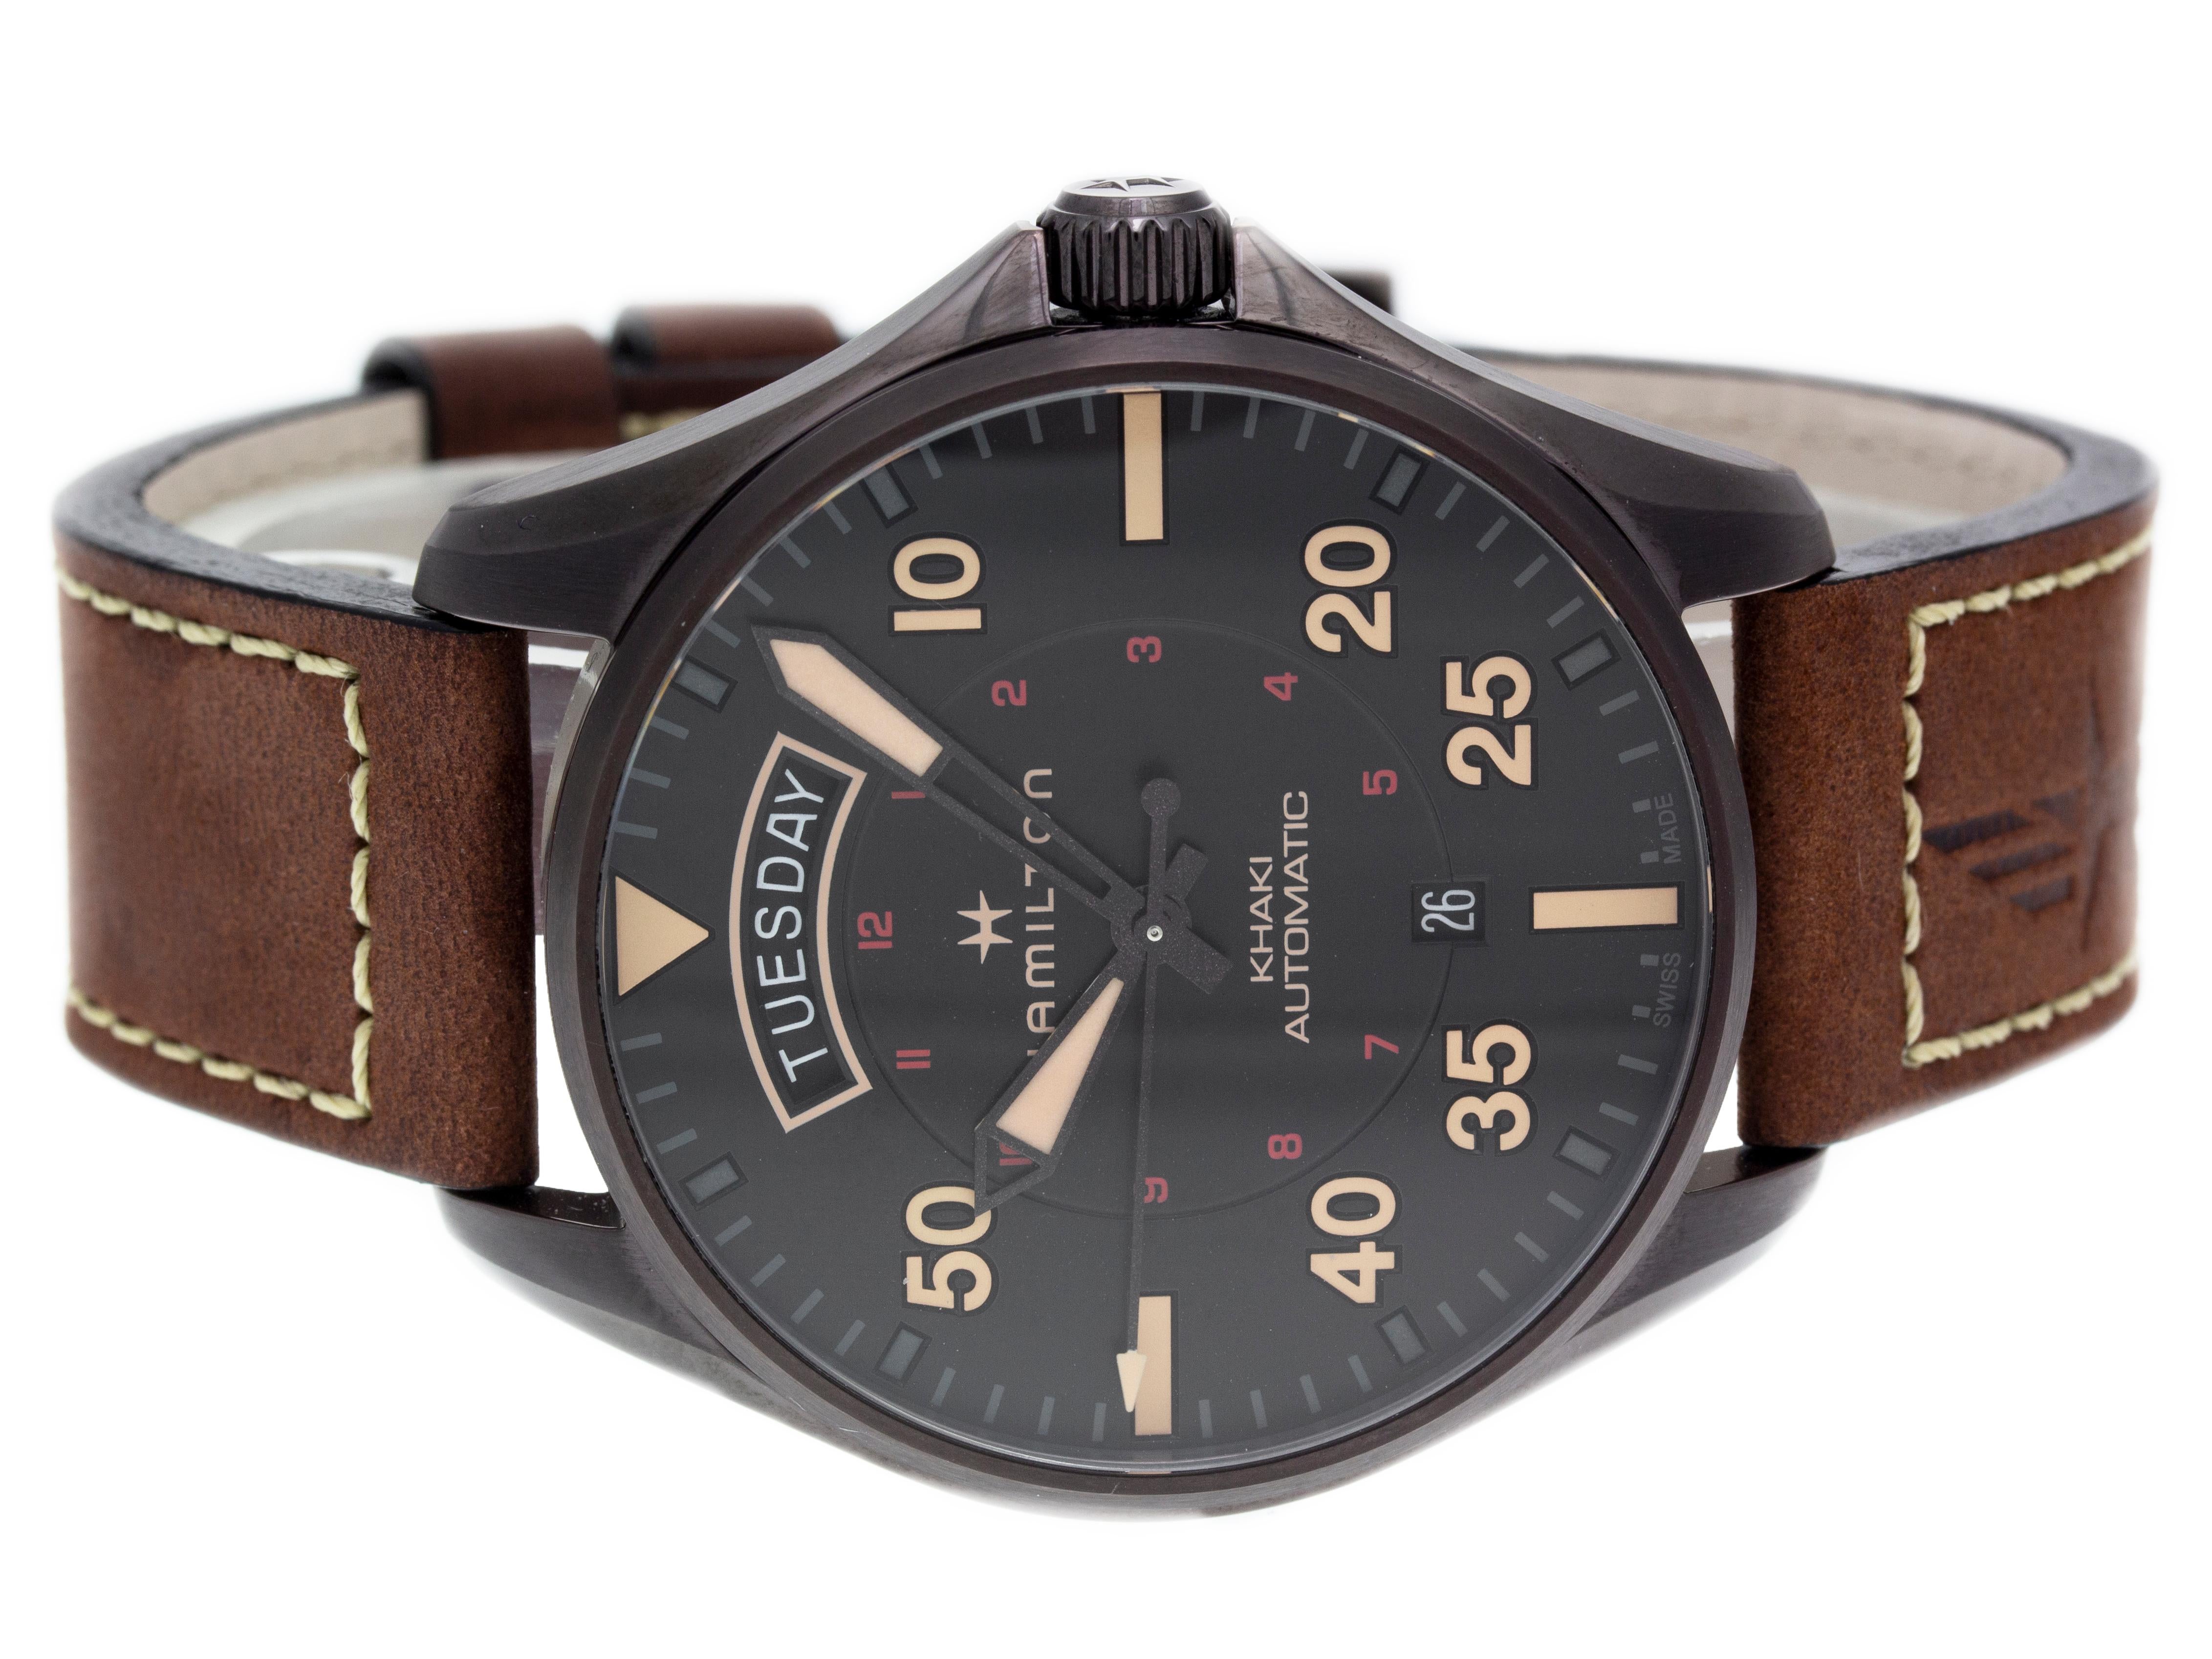 Brown PVD steel Hamilton Khaki Pilot Day Date automatic watch with a 42mm case, black dial, and brown leather strap with tang buckle. Features include hours, minutes, seconds, day, and date. Comes with a Deluxe Gift Box and 2 Year Store